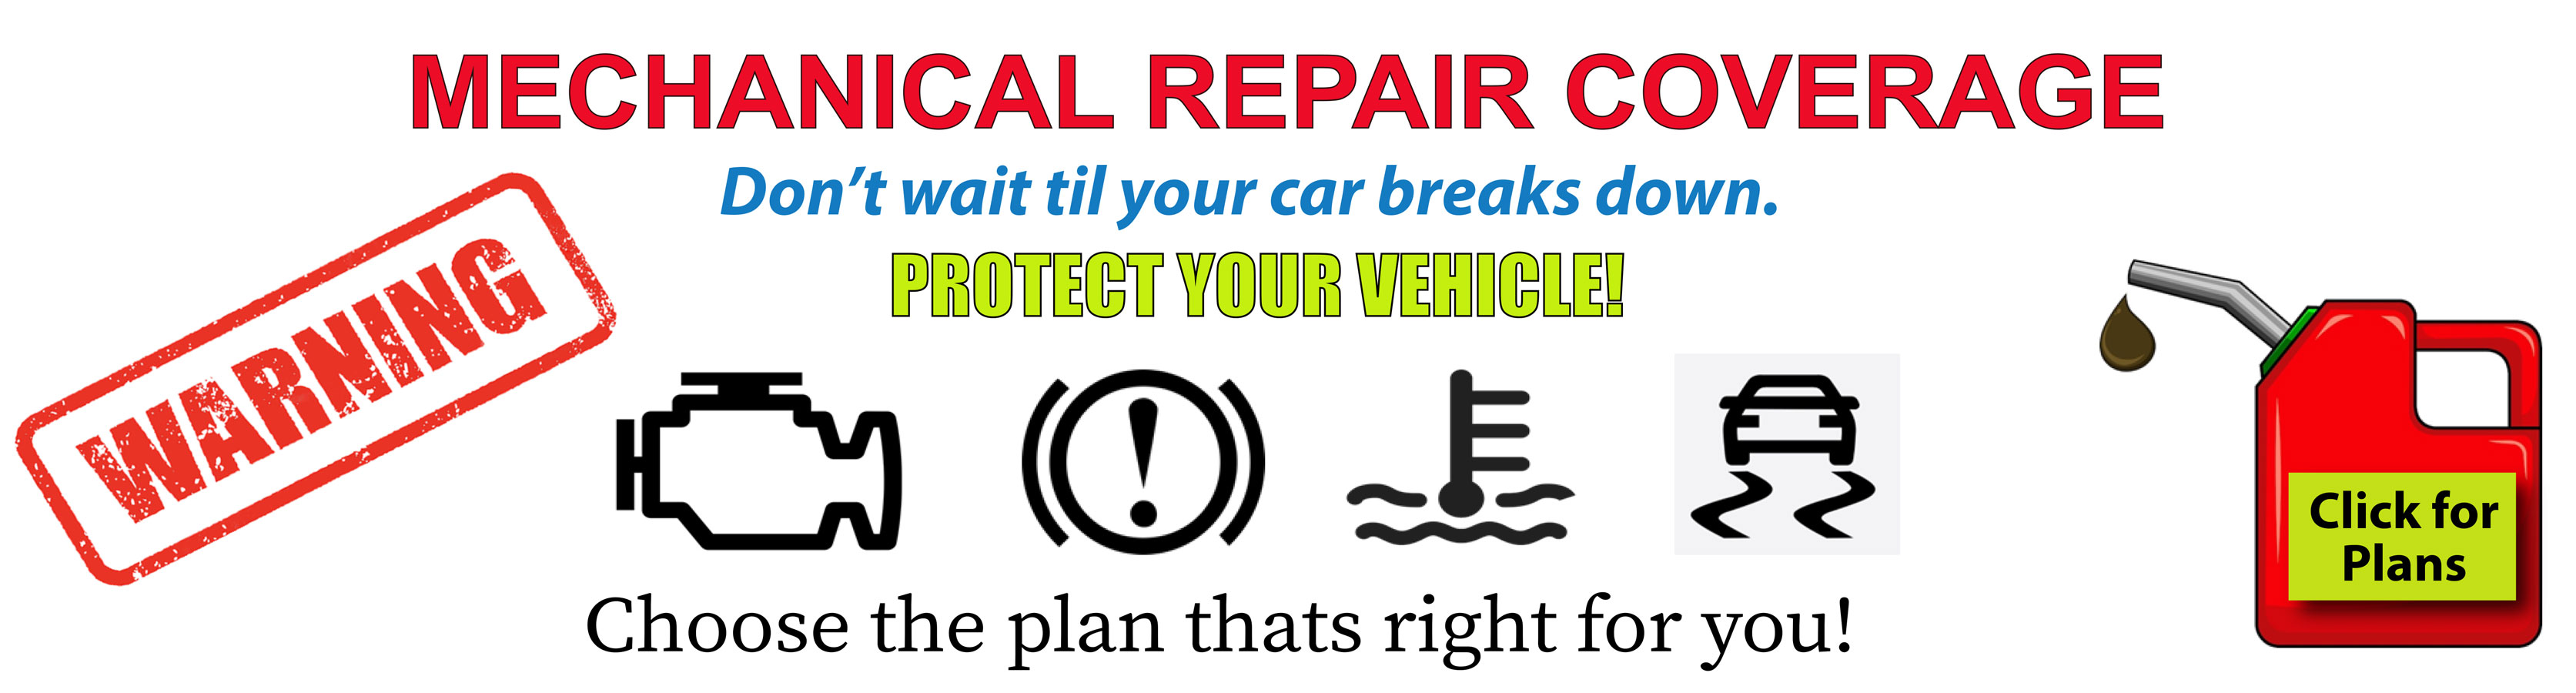 Mechanical Repair Coverage. Protect your vehicle